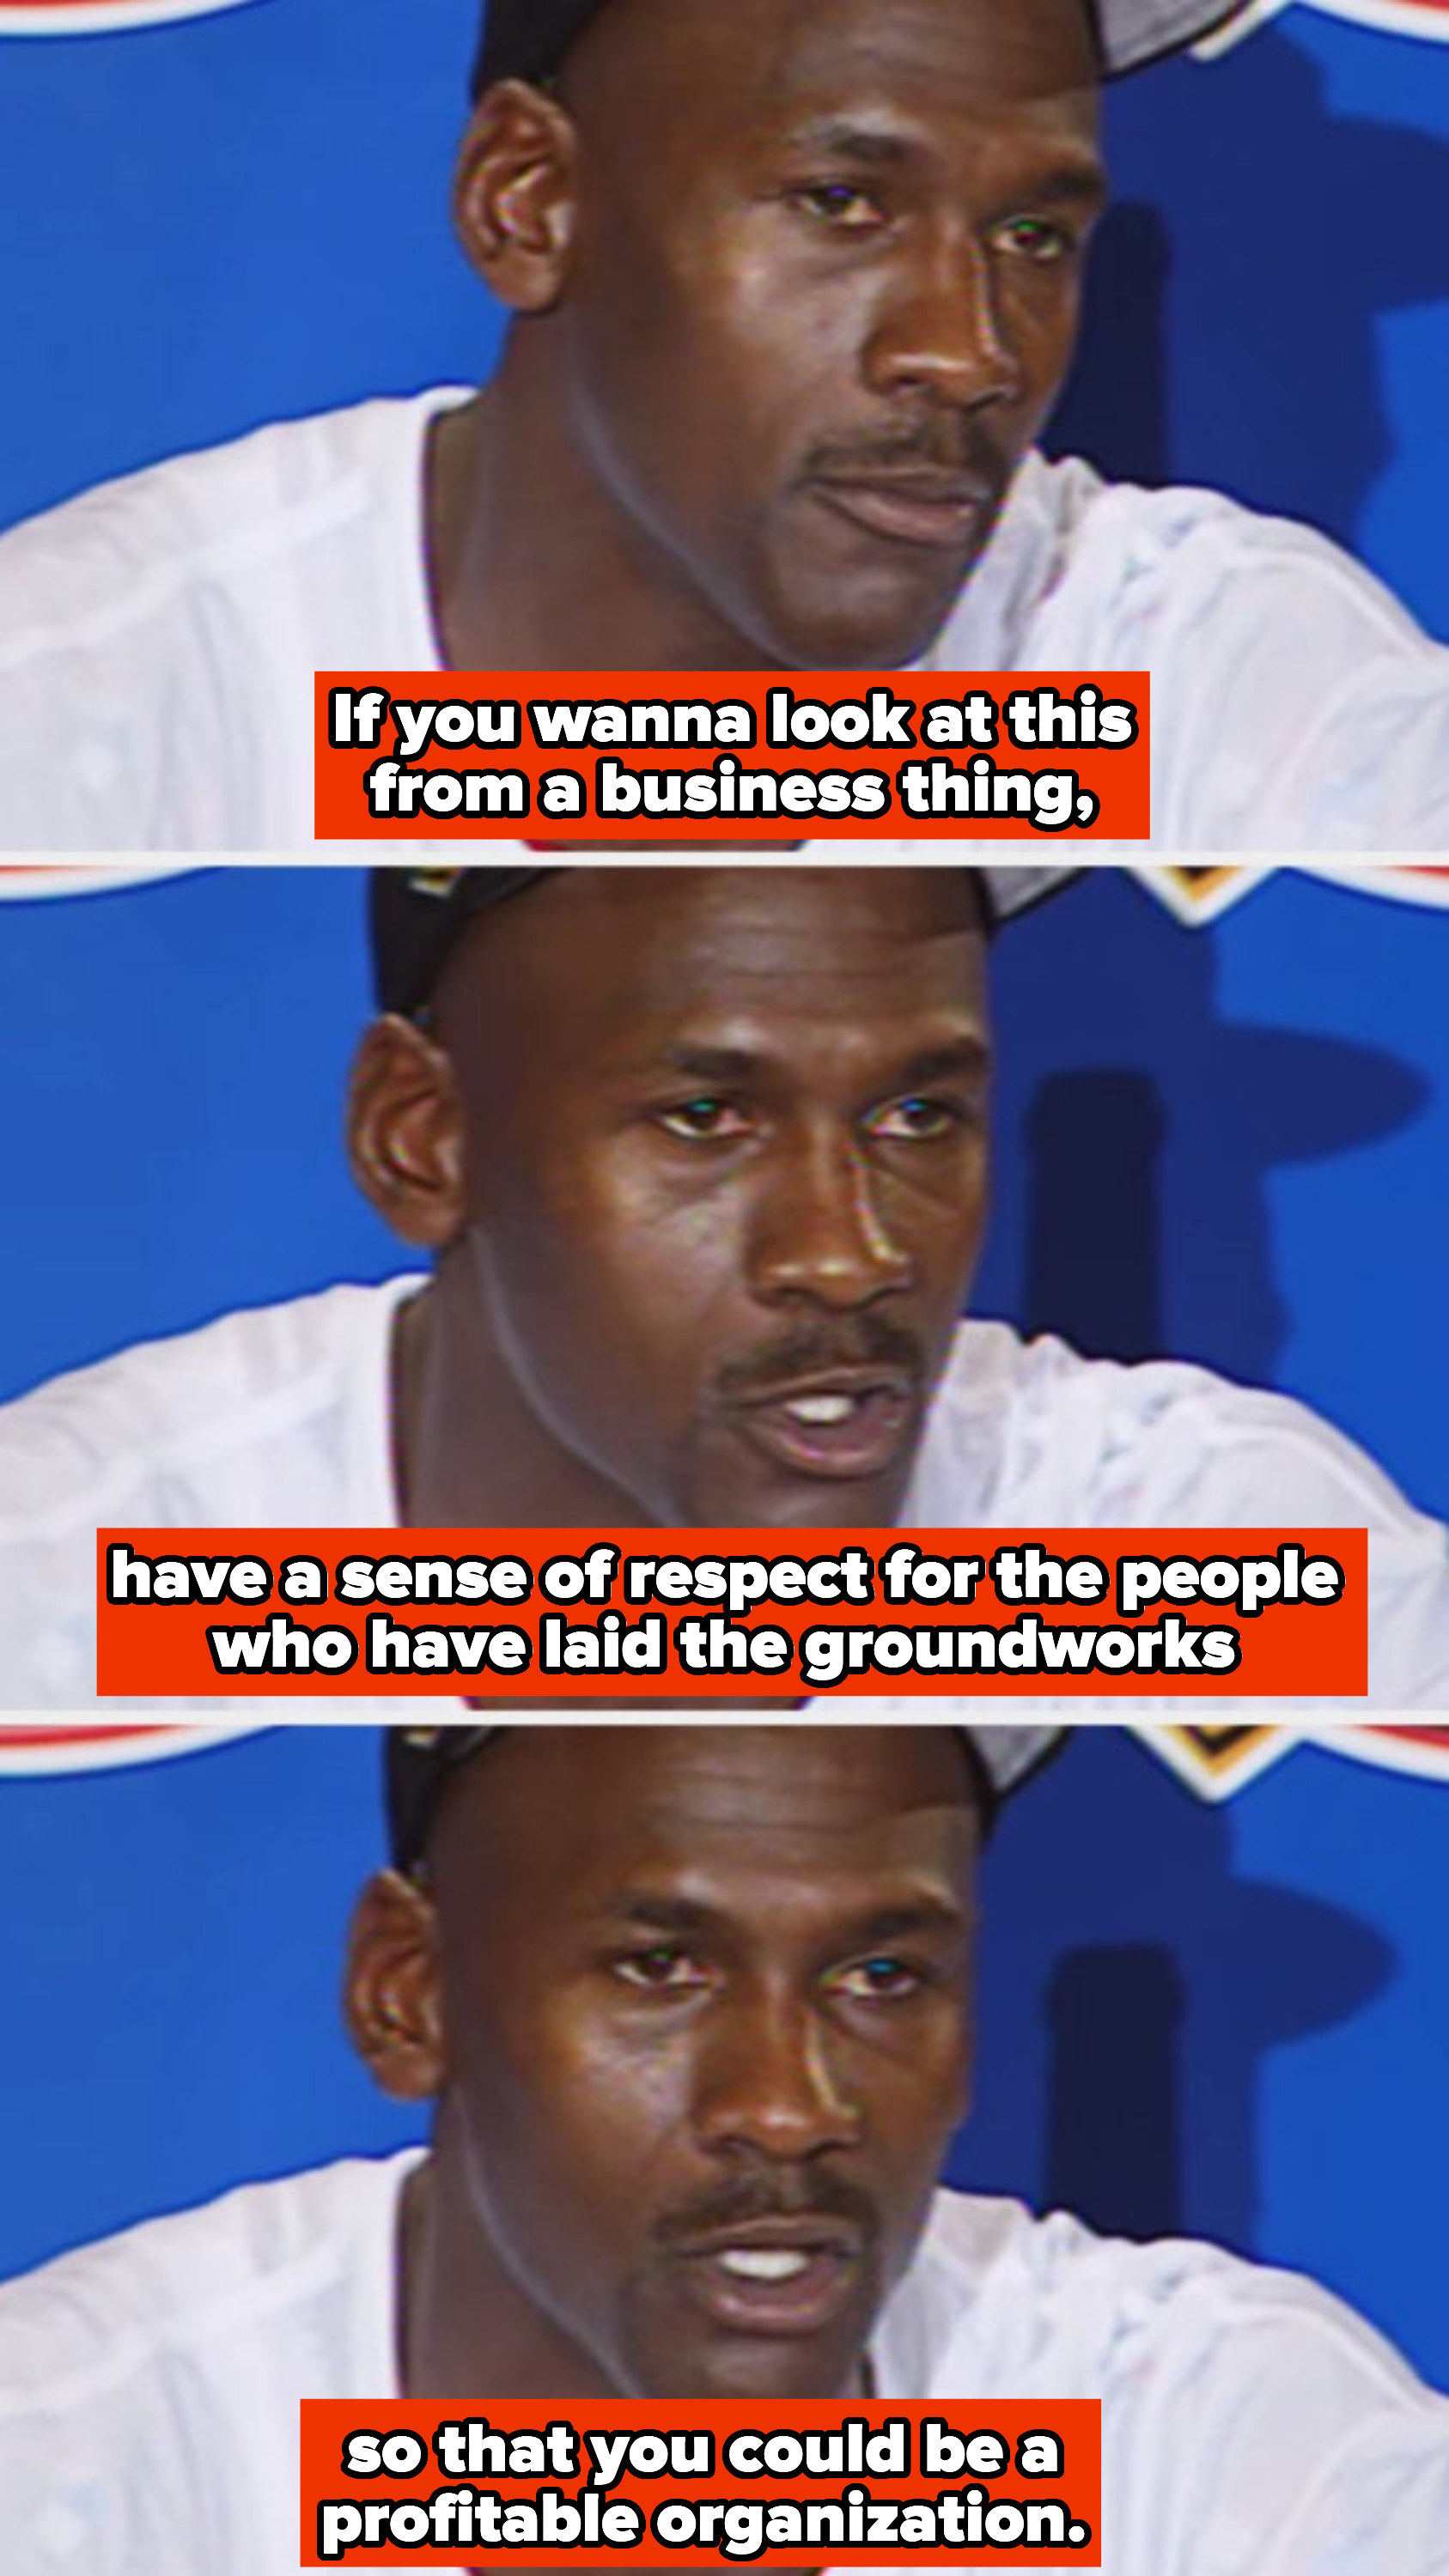 Michael Jordan during a press conference in the &#x27;90s, saying: &quot;If you wanna look at this from a business thing, have a sense of respect for the people who have laid the groundworks so that you could be a profitable organization&quot;